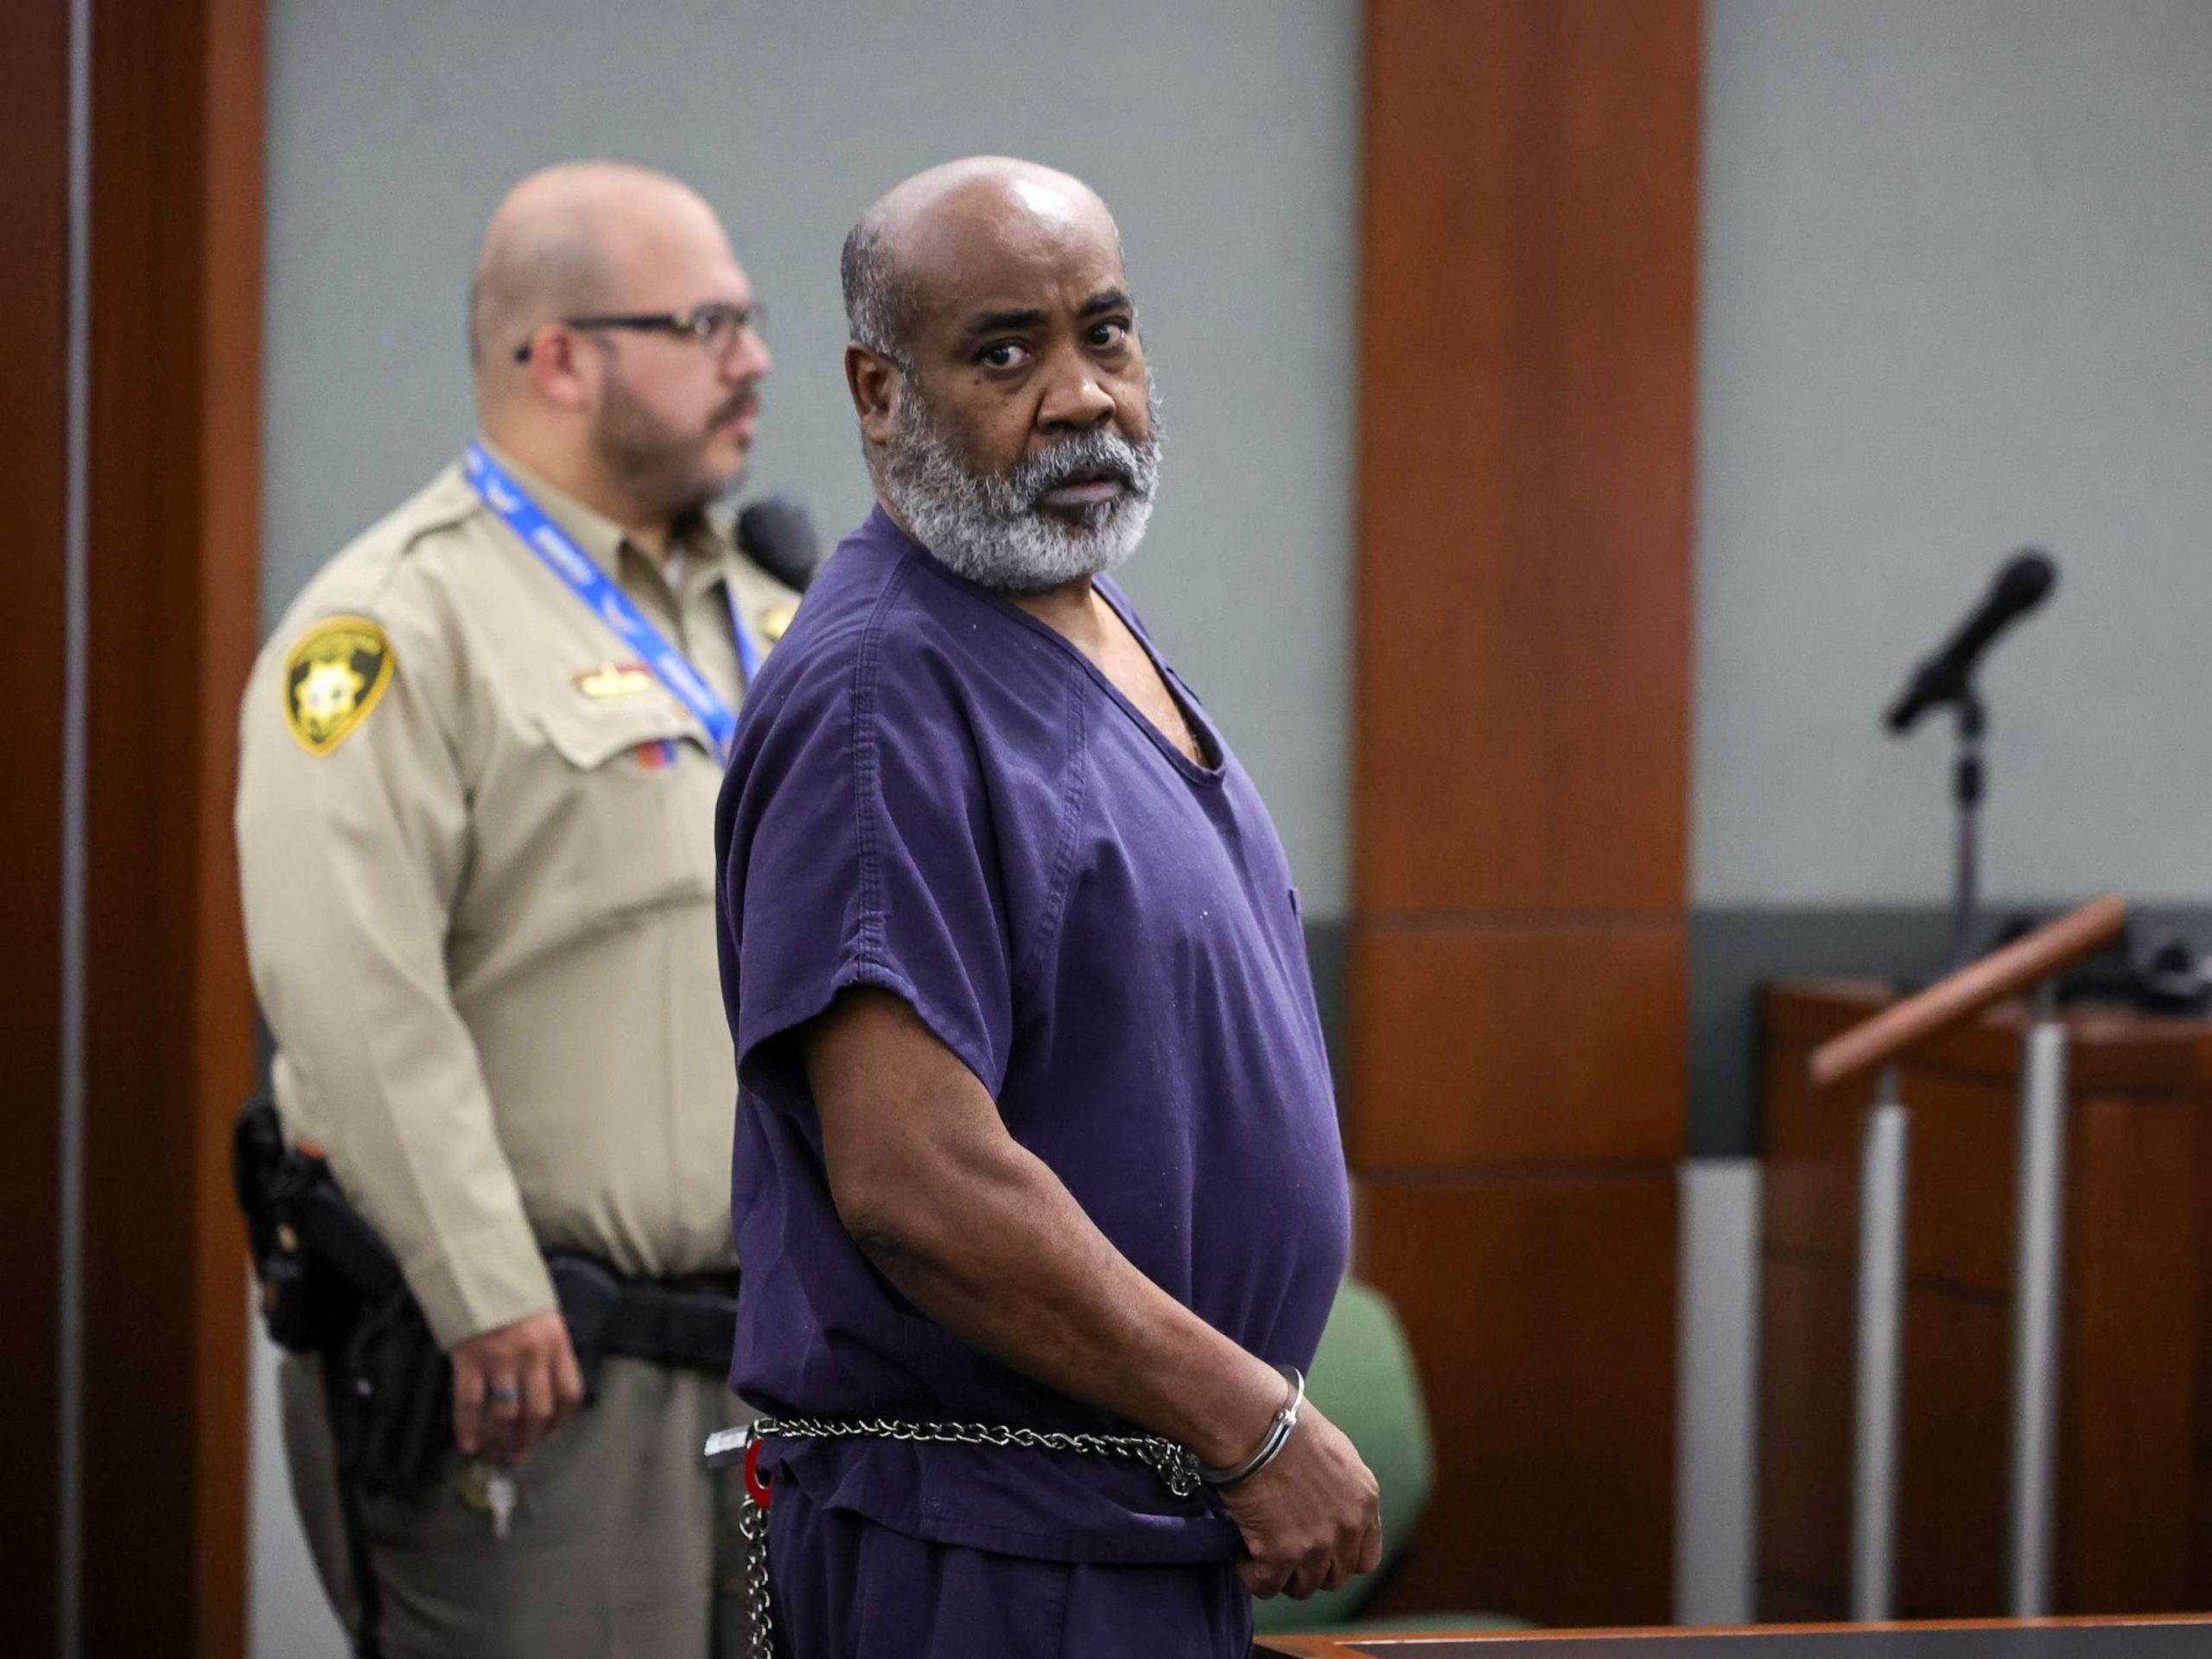 Duane Davis, the suspect in the murder of Tupac Shakur, enters a plea of not guilty after a twice-delayed arraignment.